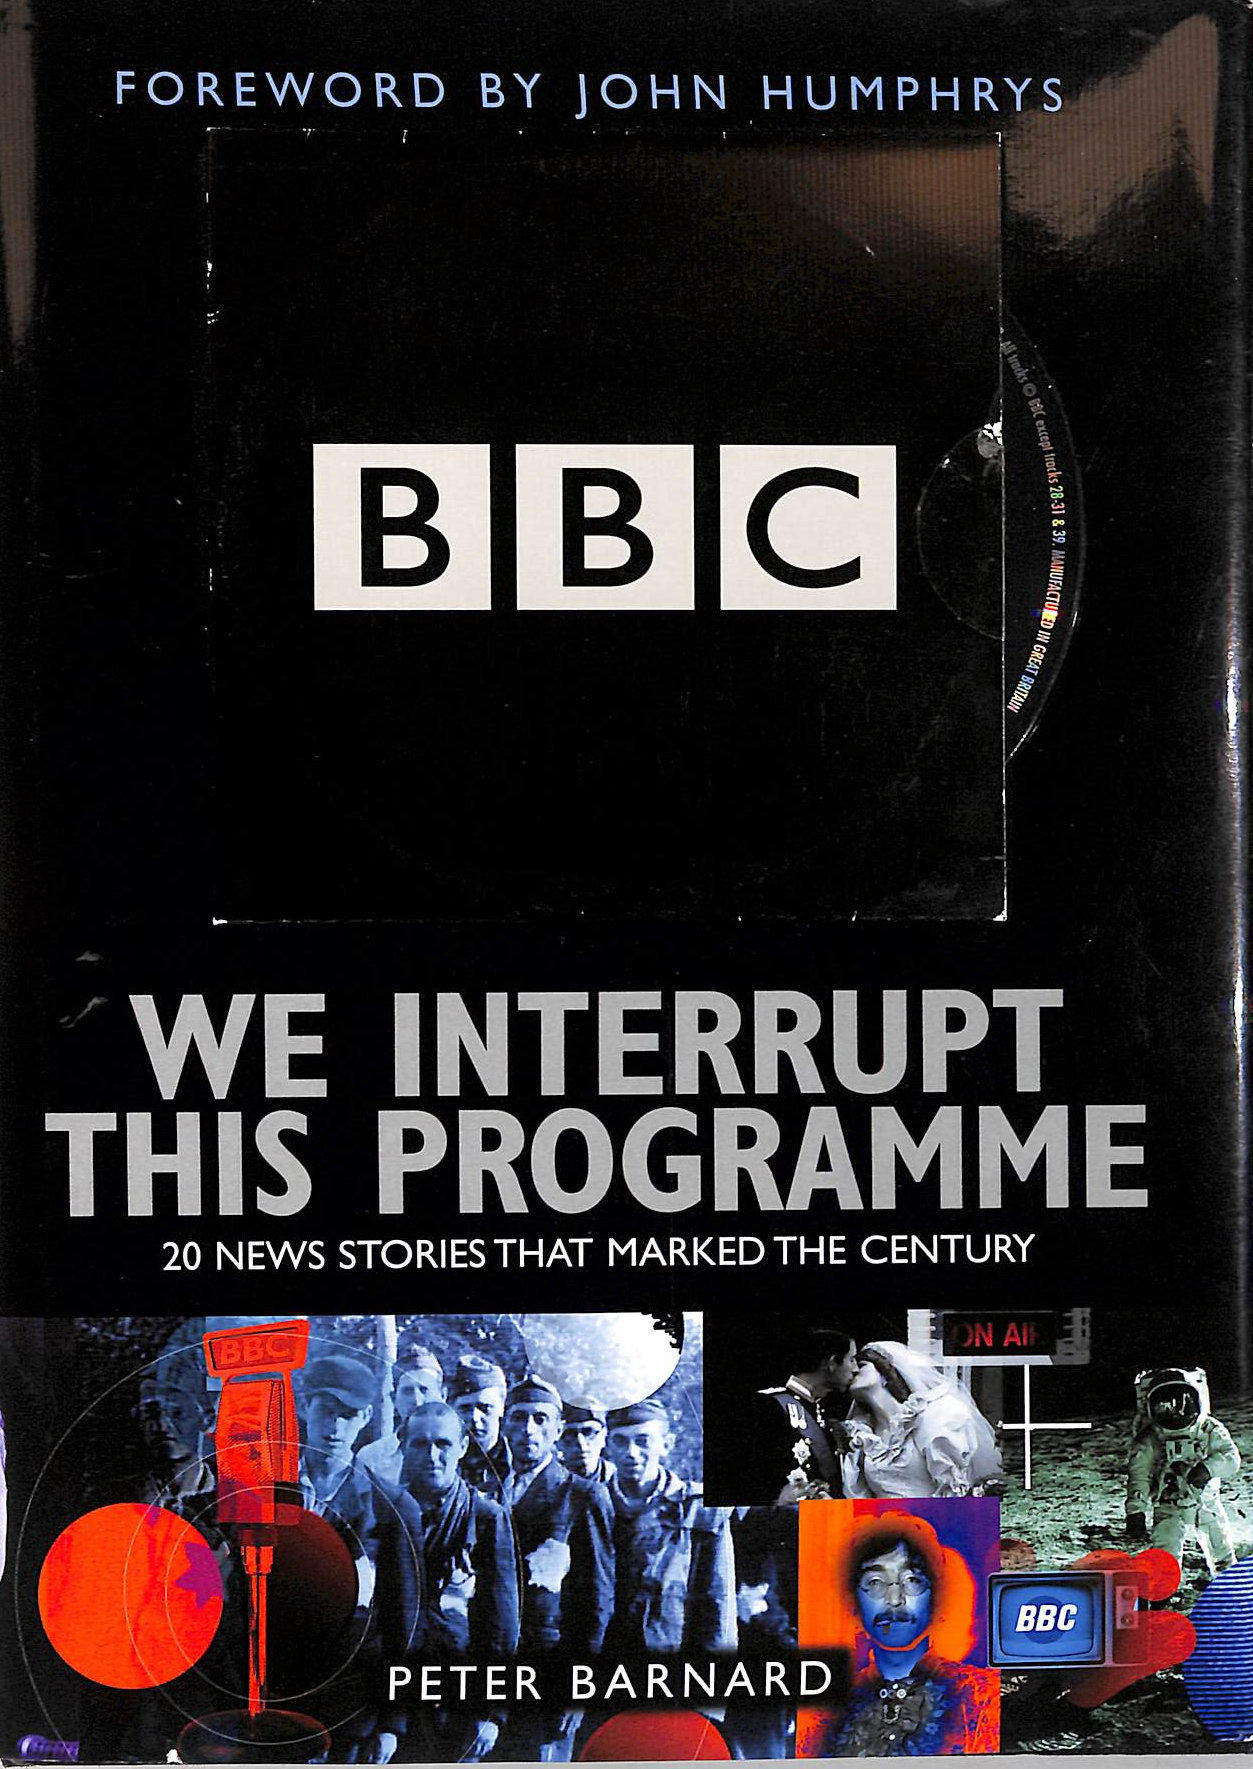 BARNARD, PETER; HUMPHRYS, JOHN [FOREWORD] - We Interrupt This Programme (with audio CD)